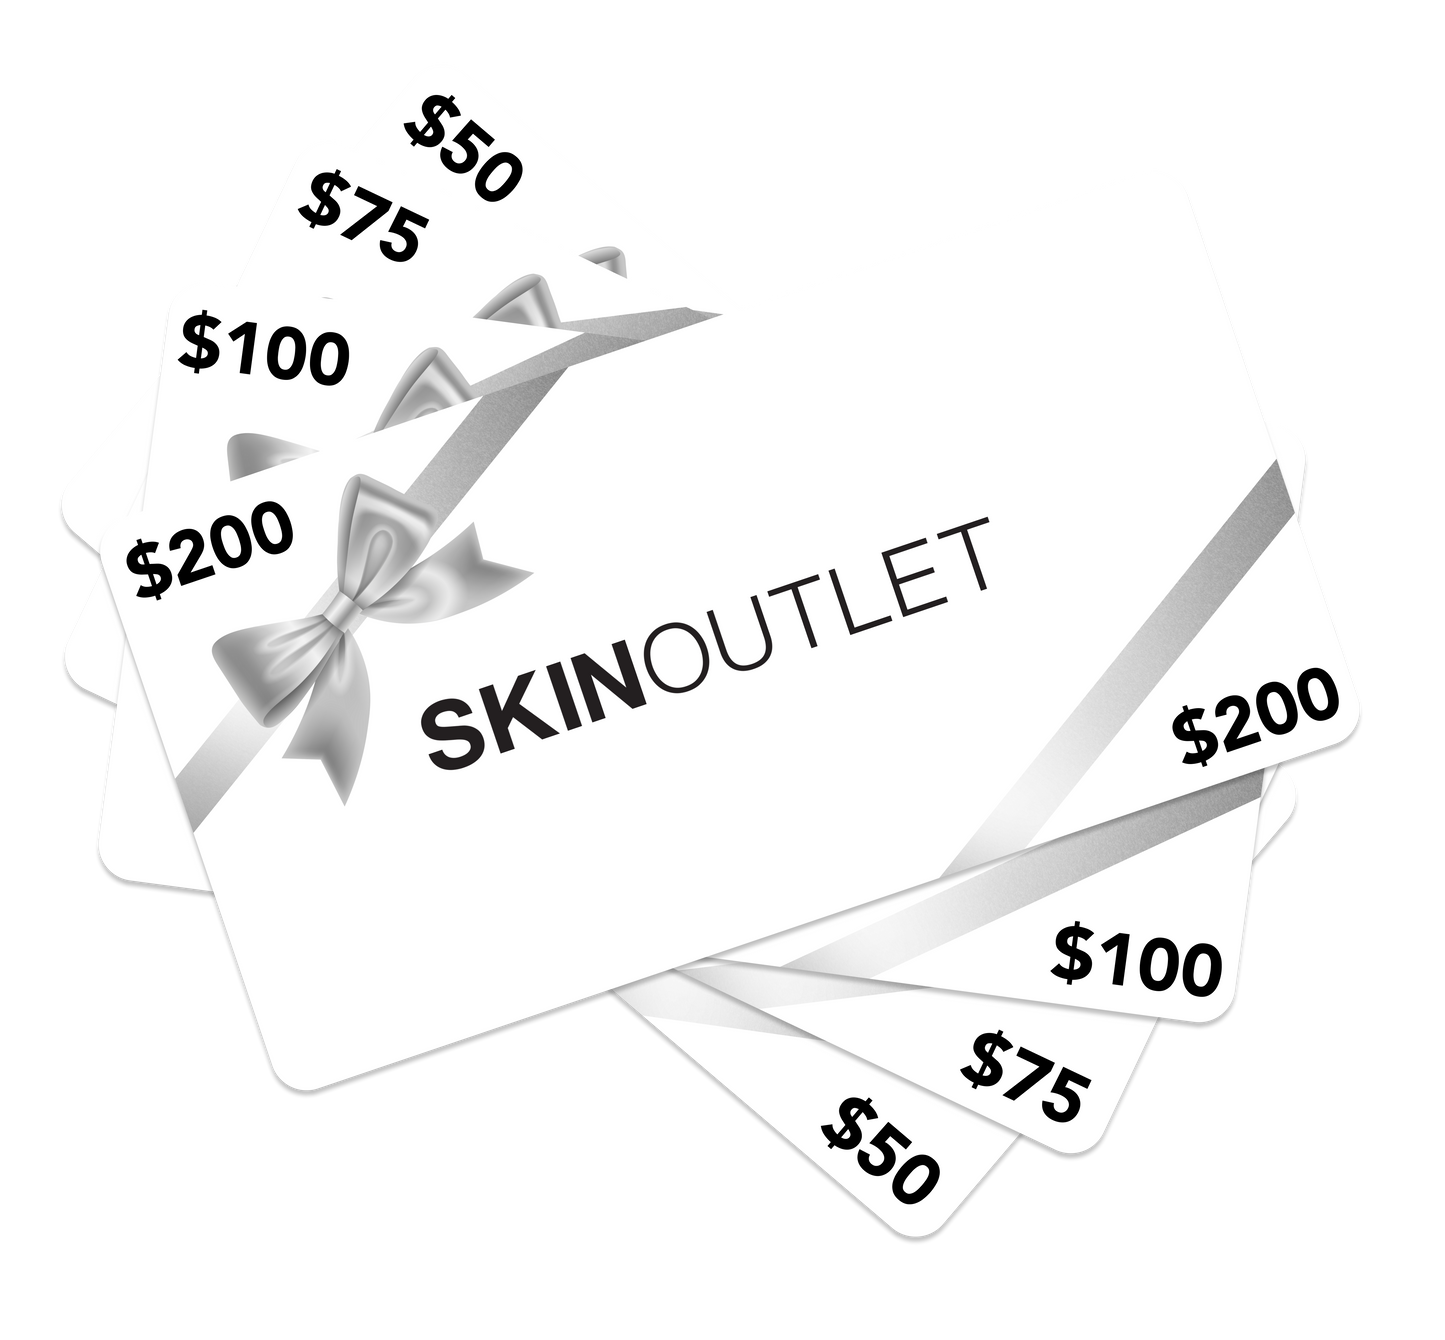 Skin Outlet E-Gift Card